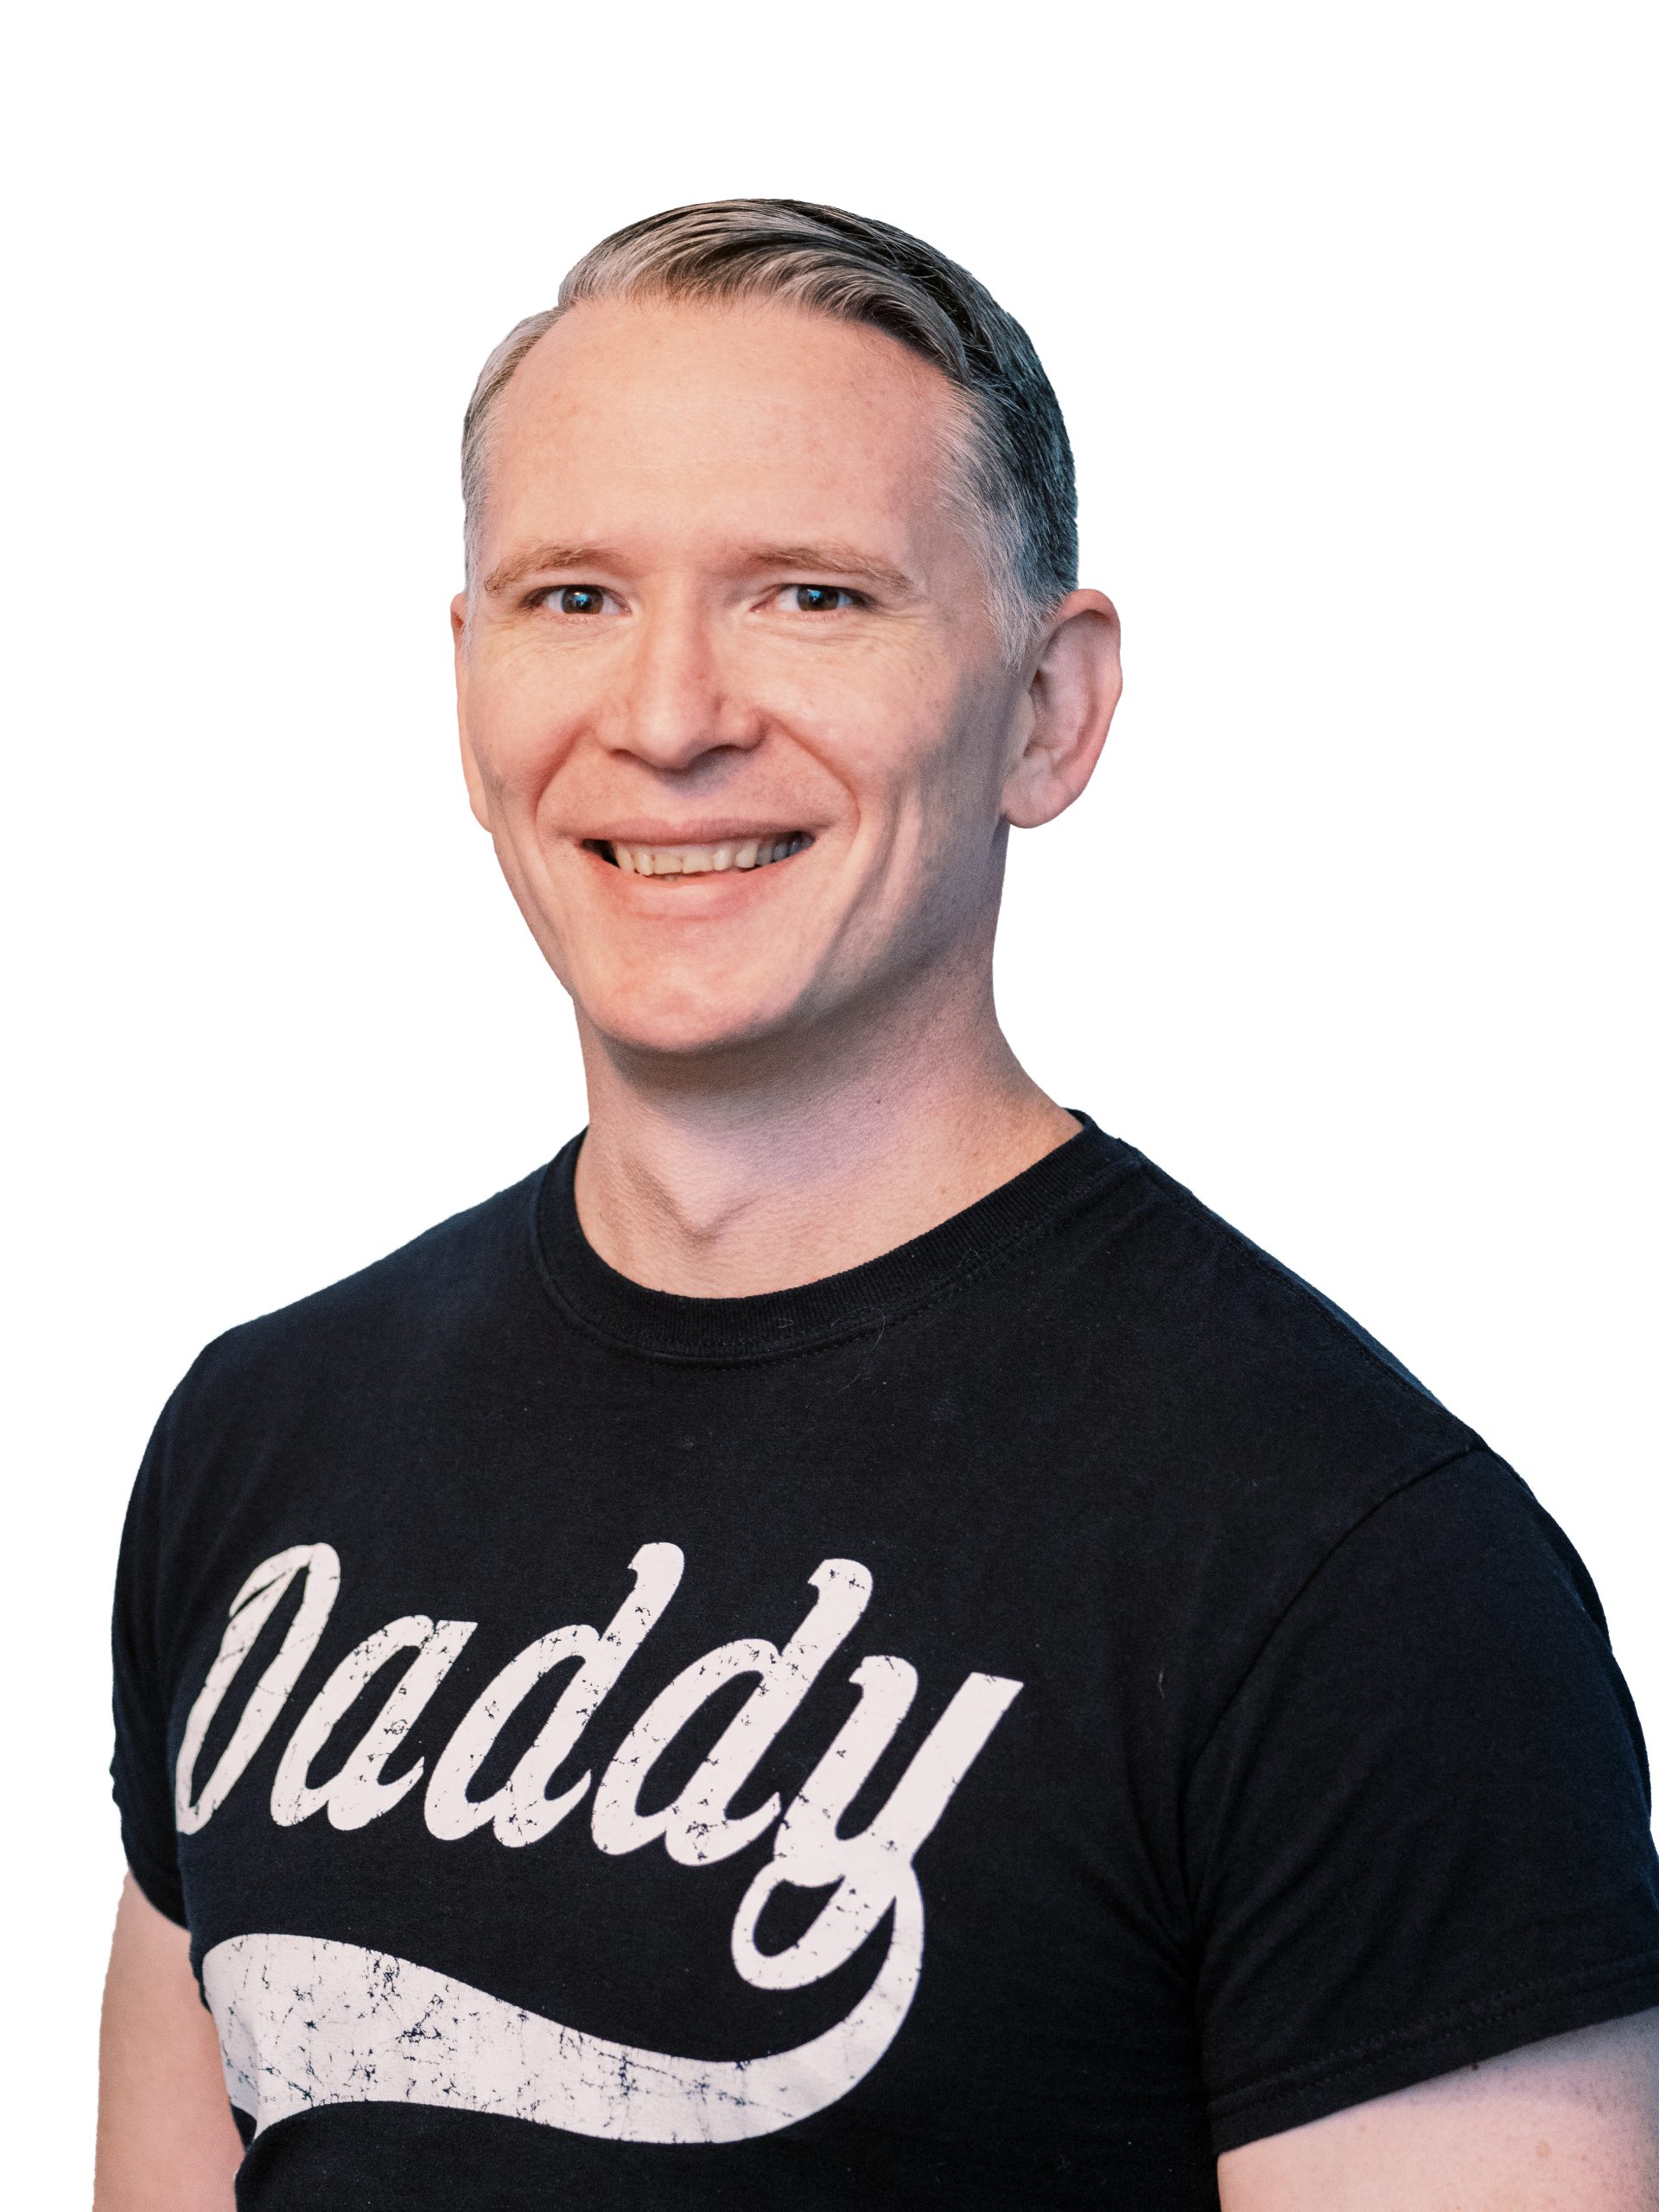 Headshot of Mike Johnson (host of Gayish podcast) smiling and looking at the camera. He's wearing a black shirt with the word "Daddy" written on it. White background.